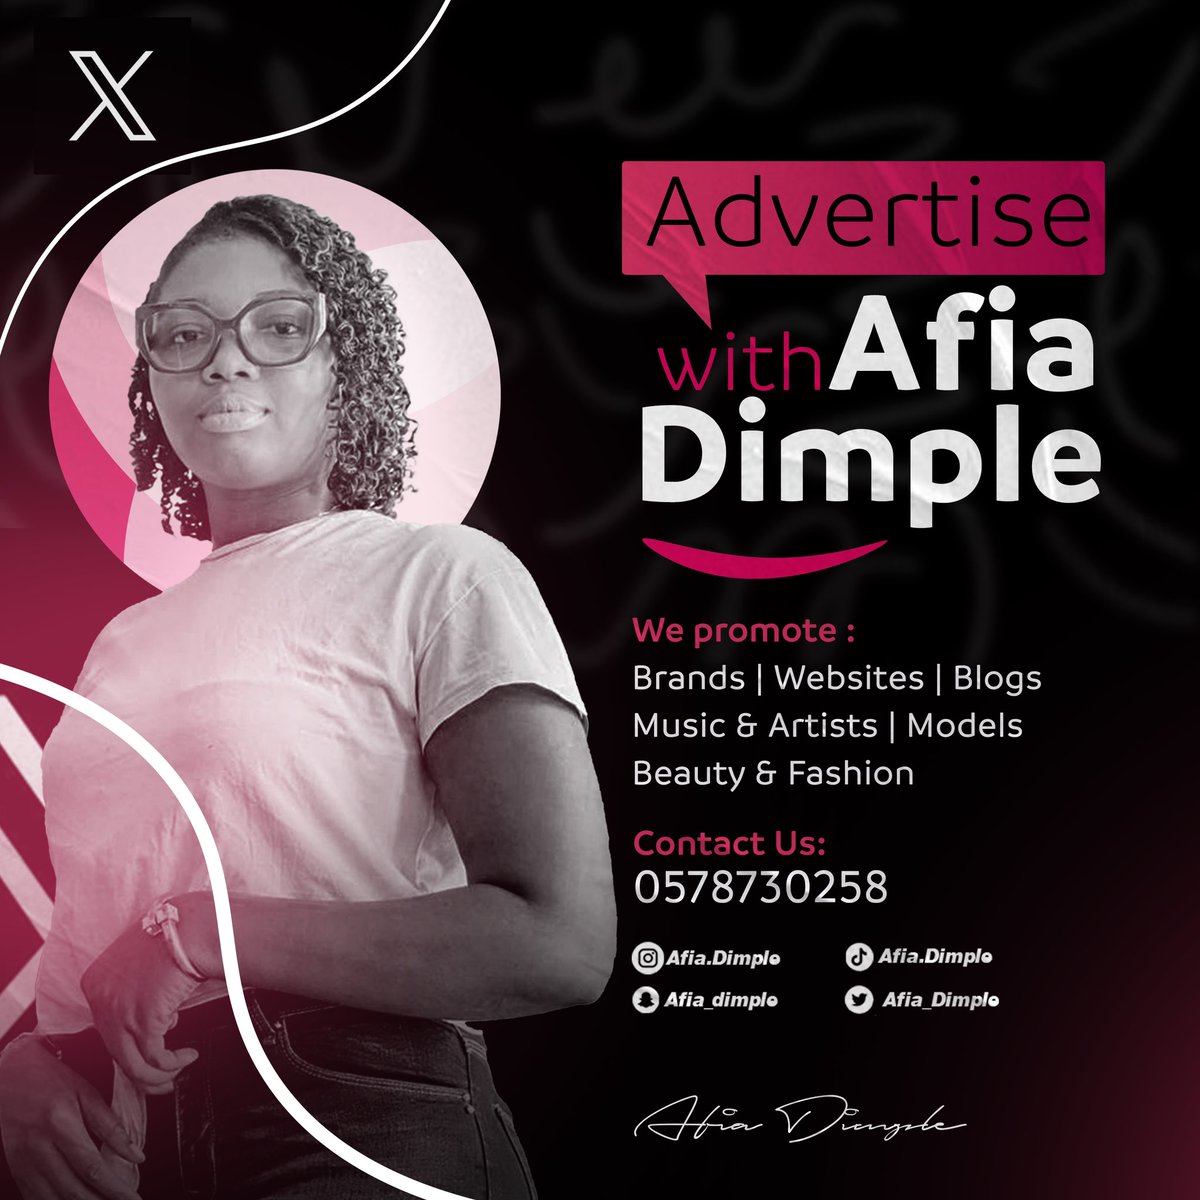 Day 95 🧀🐔 as @Afia_Dimple dey share Momo, don't y'all forget to advertise with her. Let her promote your brands, websites, blogs, music & artist, models, beauty & fashion. she got y'all 🫵🫶❤ let's support her hustle deeply 🫴❤ #AdvertiseWithAfiaDimple